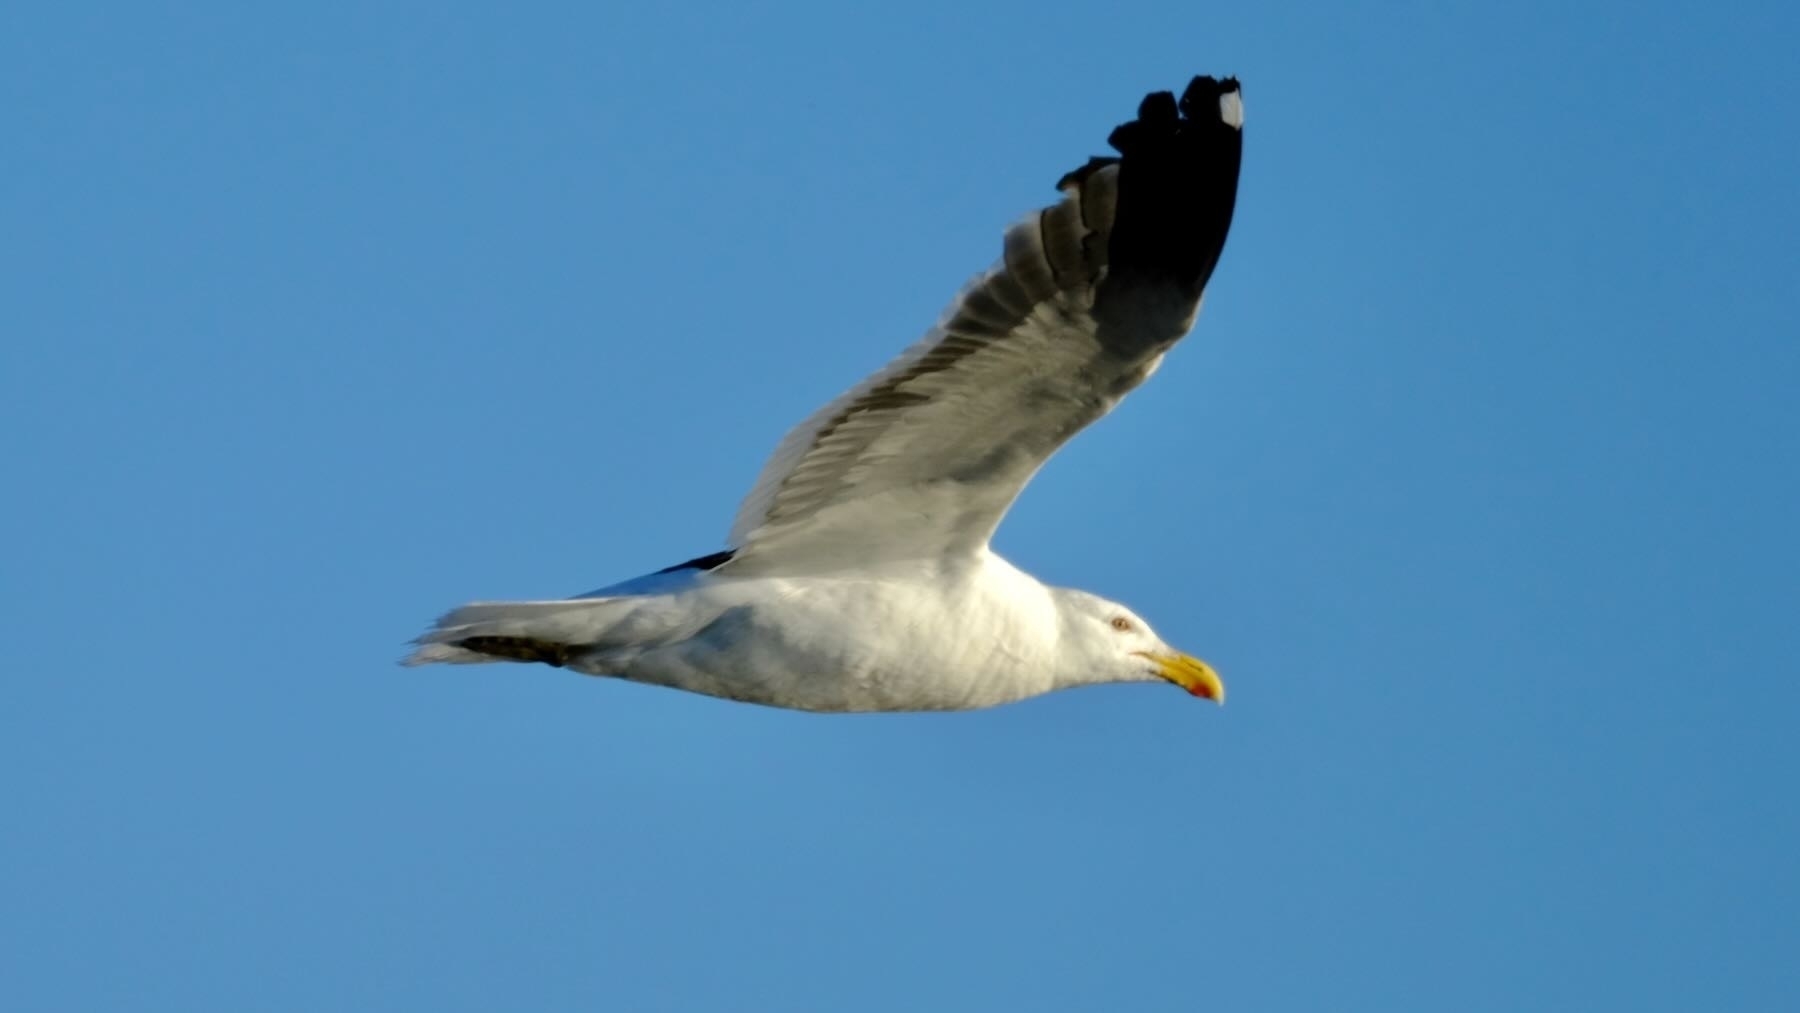 Black backed gull in flight with wings out. 